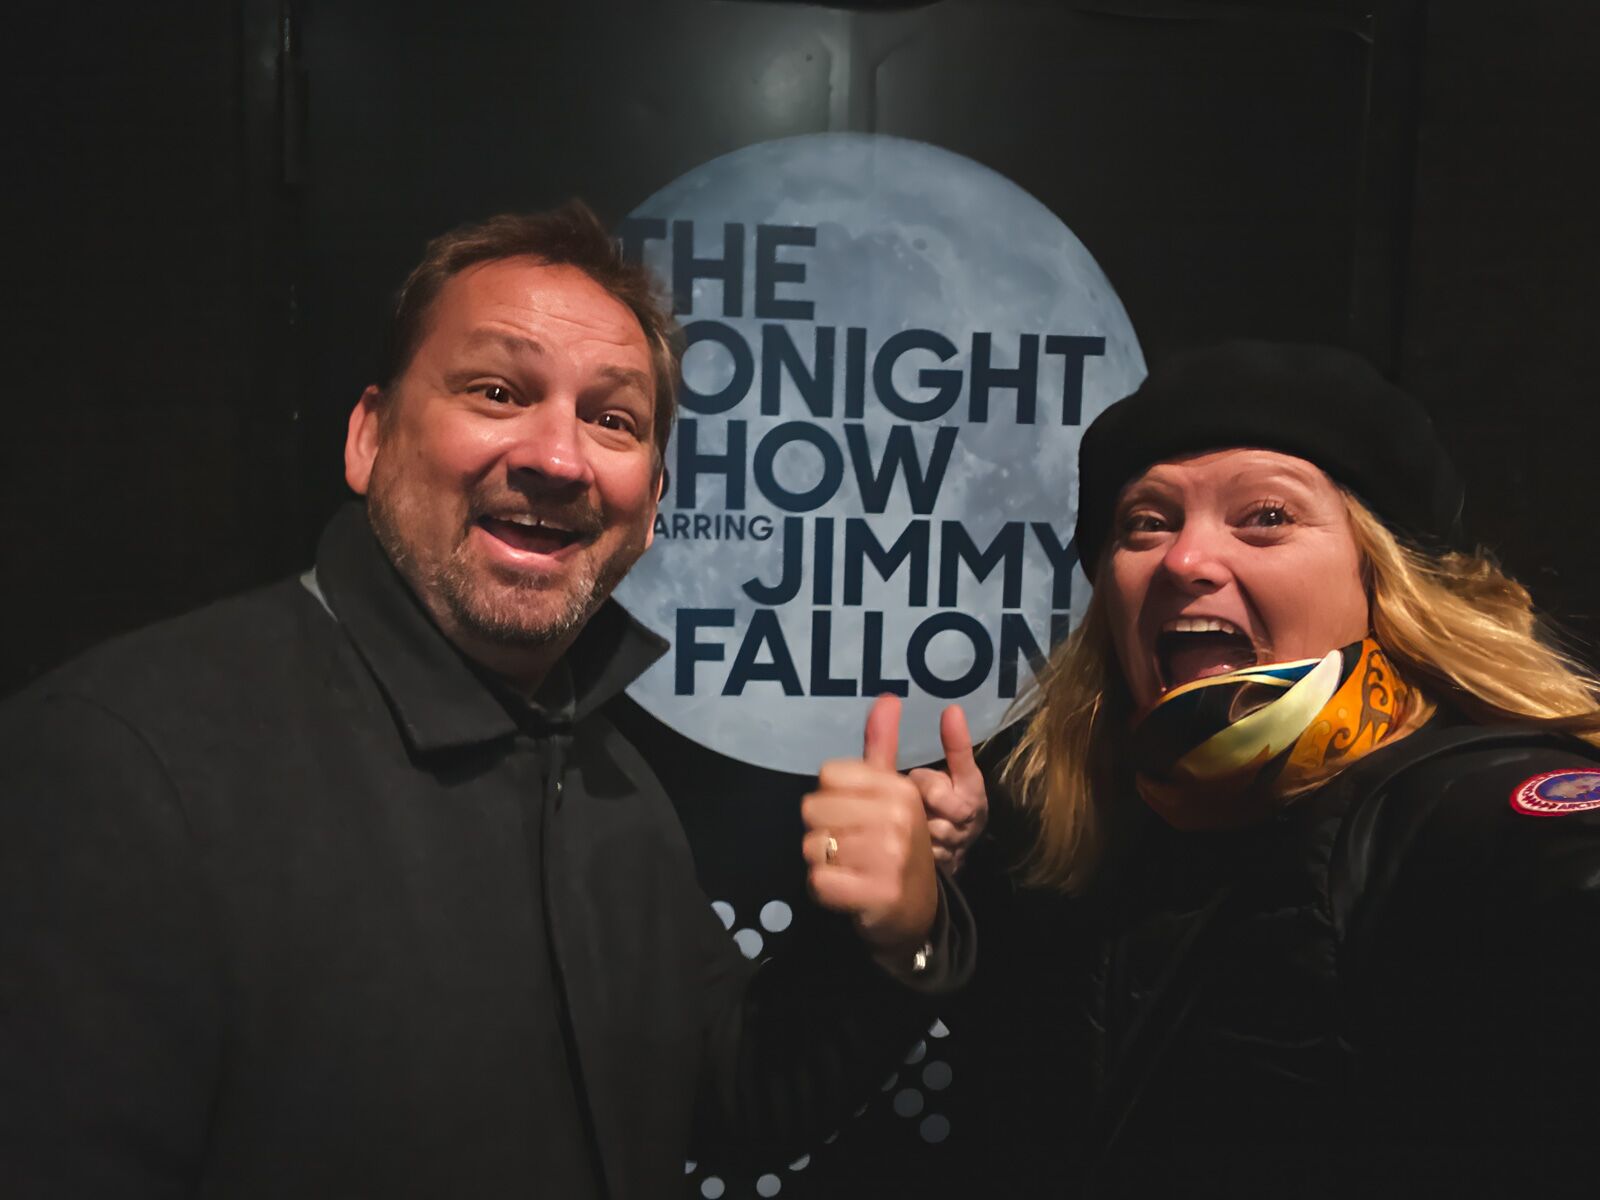 Checking out the Jimmy Fallon Show in New York City At Night